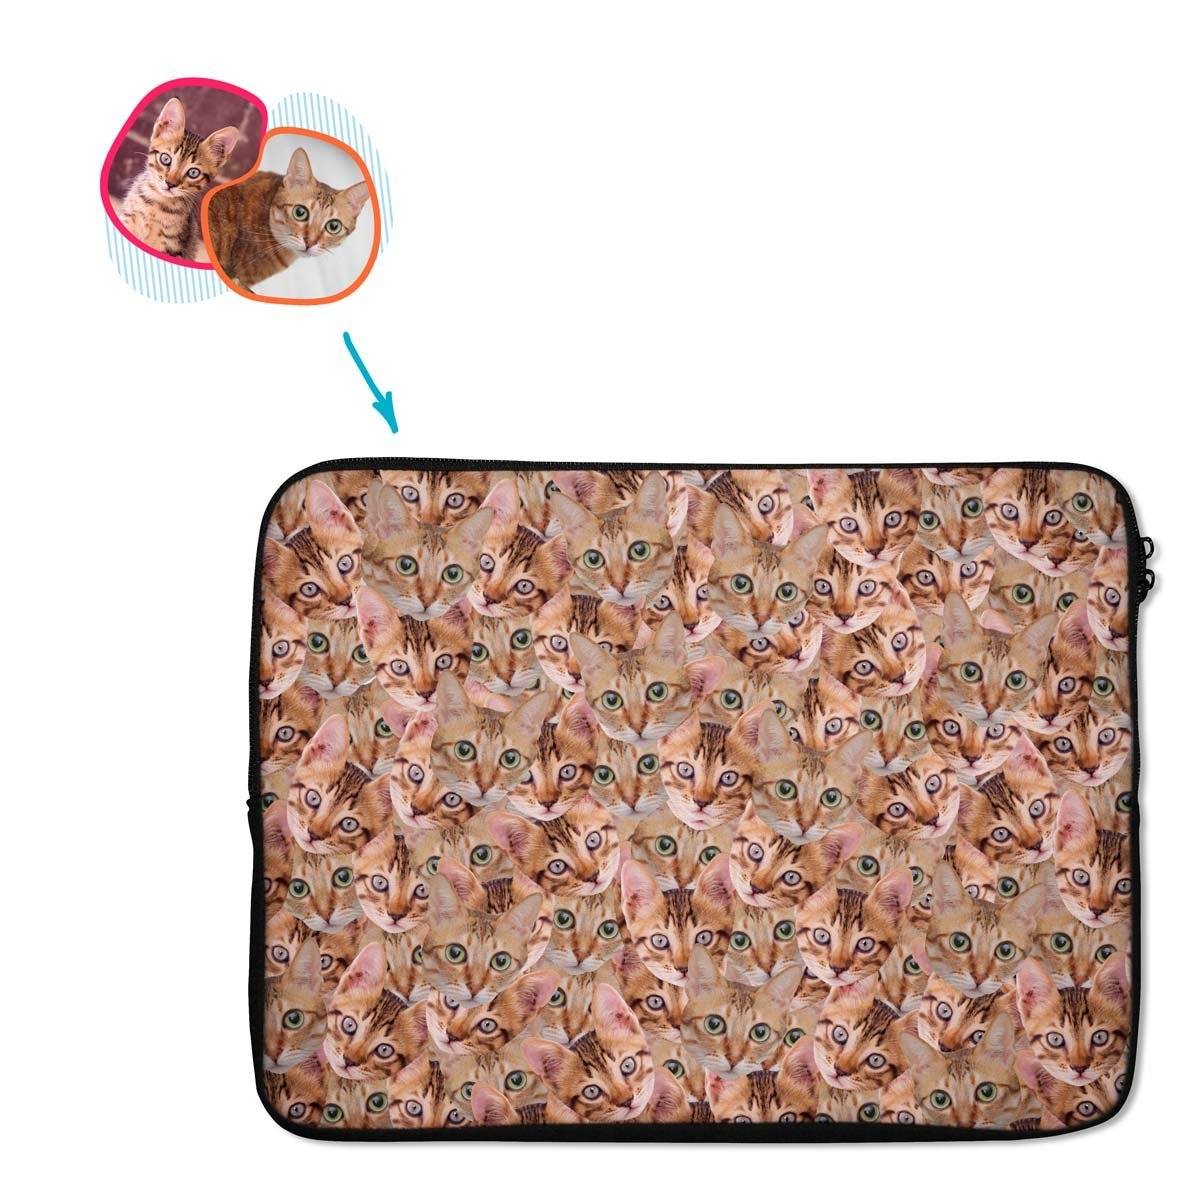 Cat Mash laptop sleeve personalized with photo of face printed on them